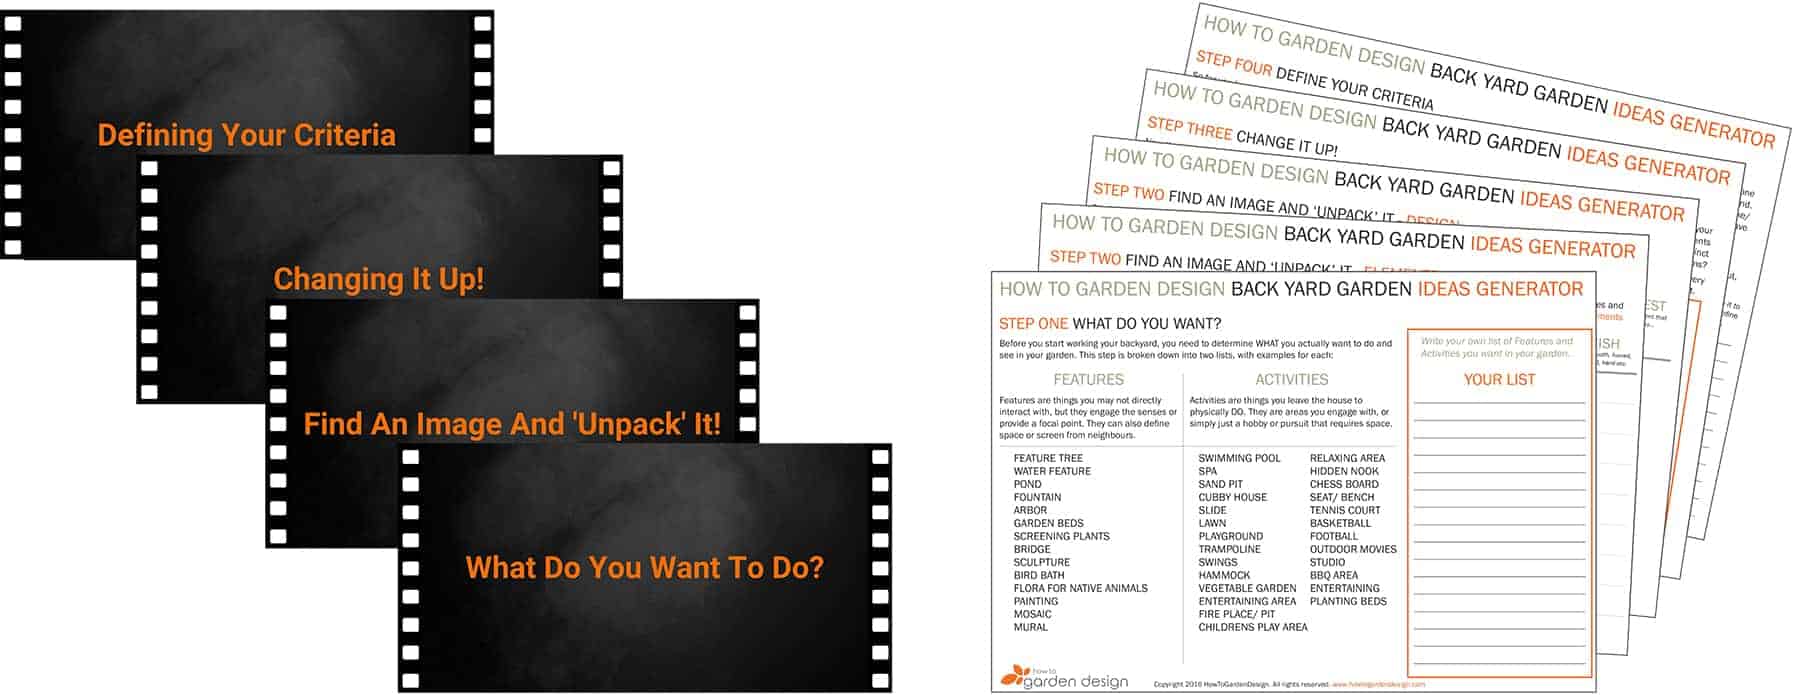 Get your FREE Videos & Cheat Sheets!